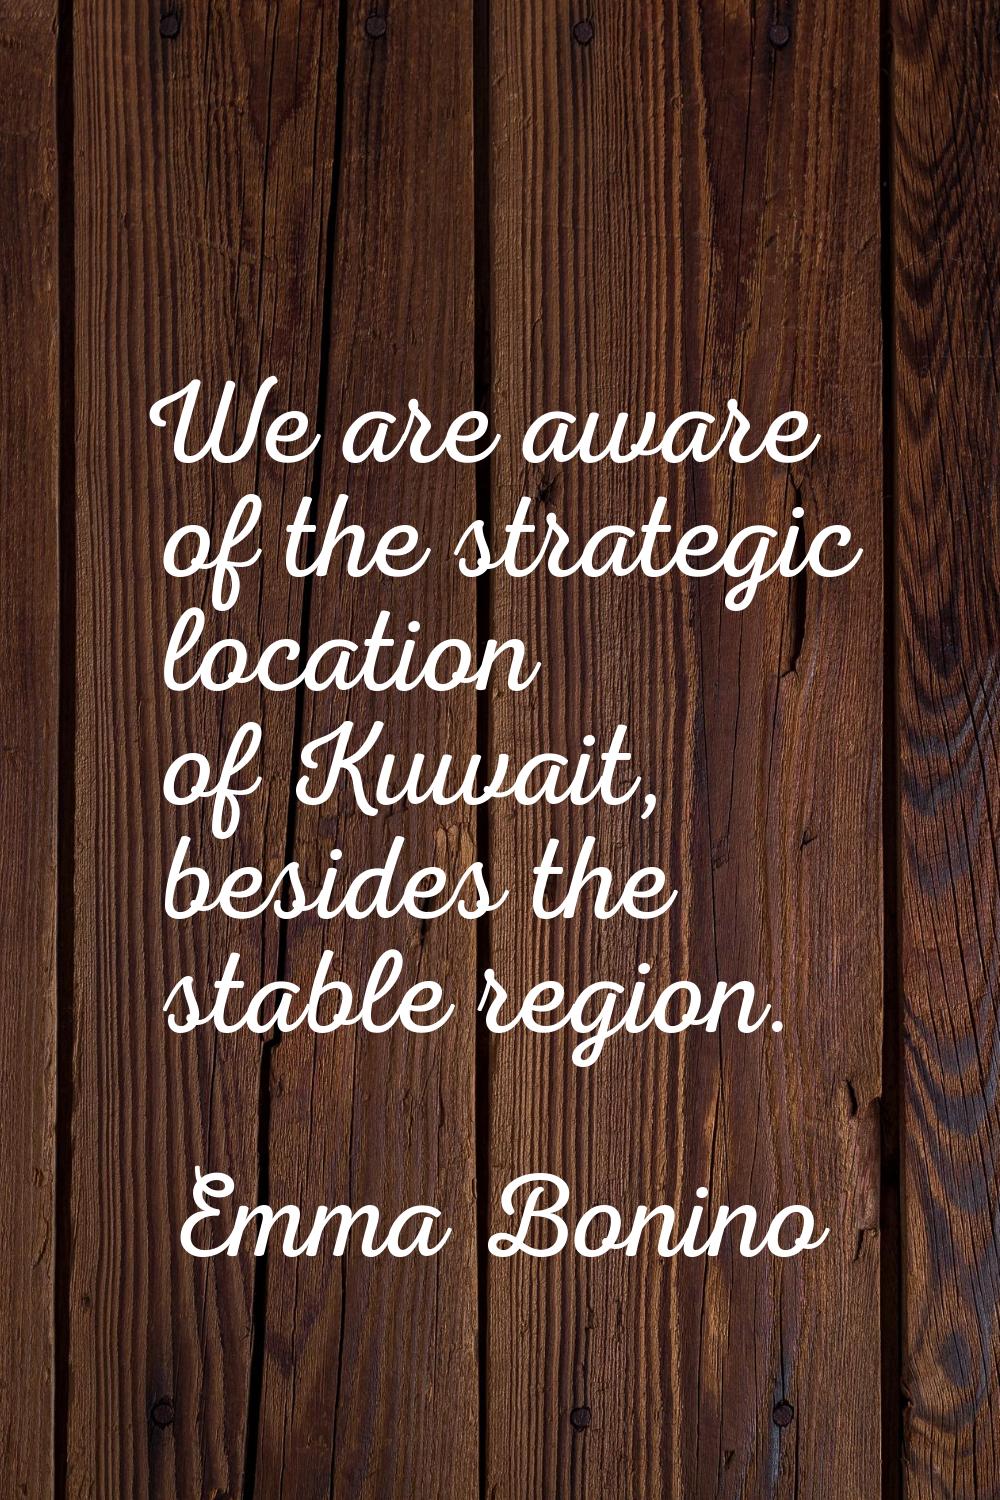 We are aware of the strategic location of Kuwait, besides the stable region.